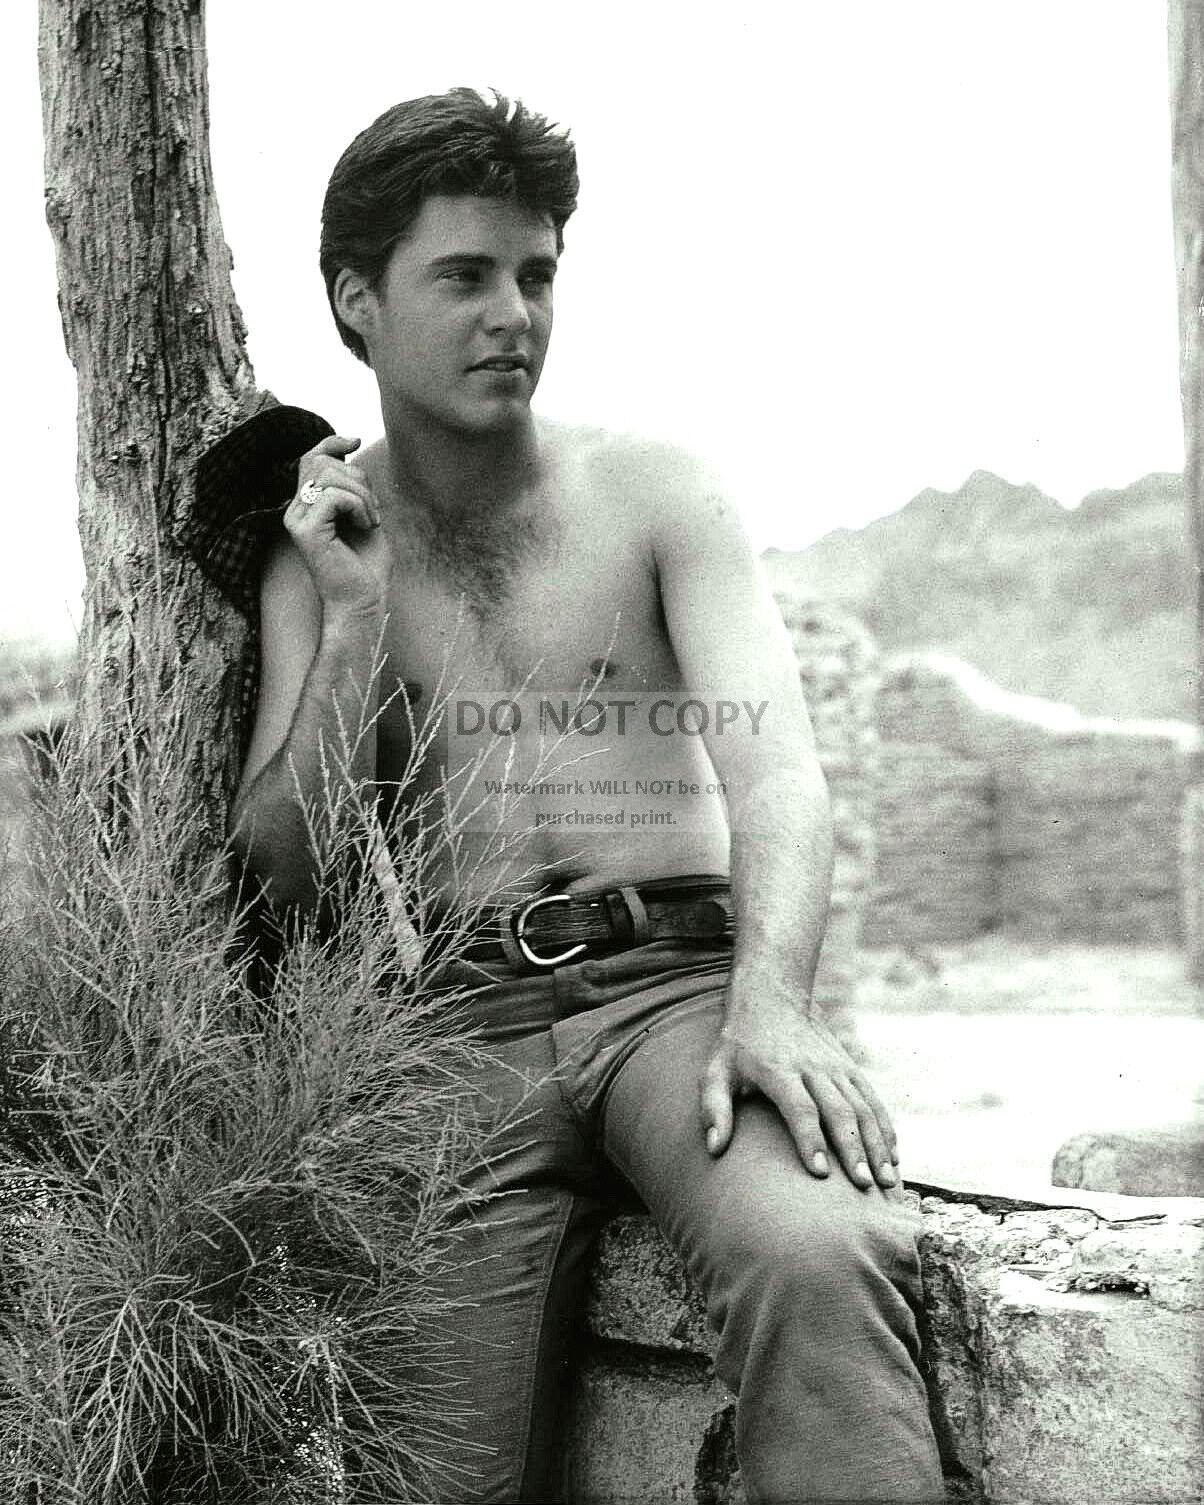 RICKY NELSON TAKES BREAK ON THE SET OF 